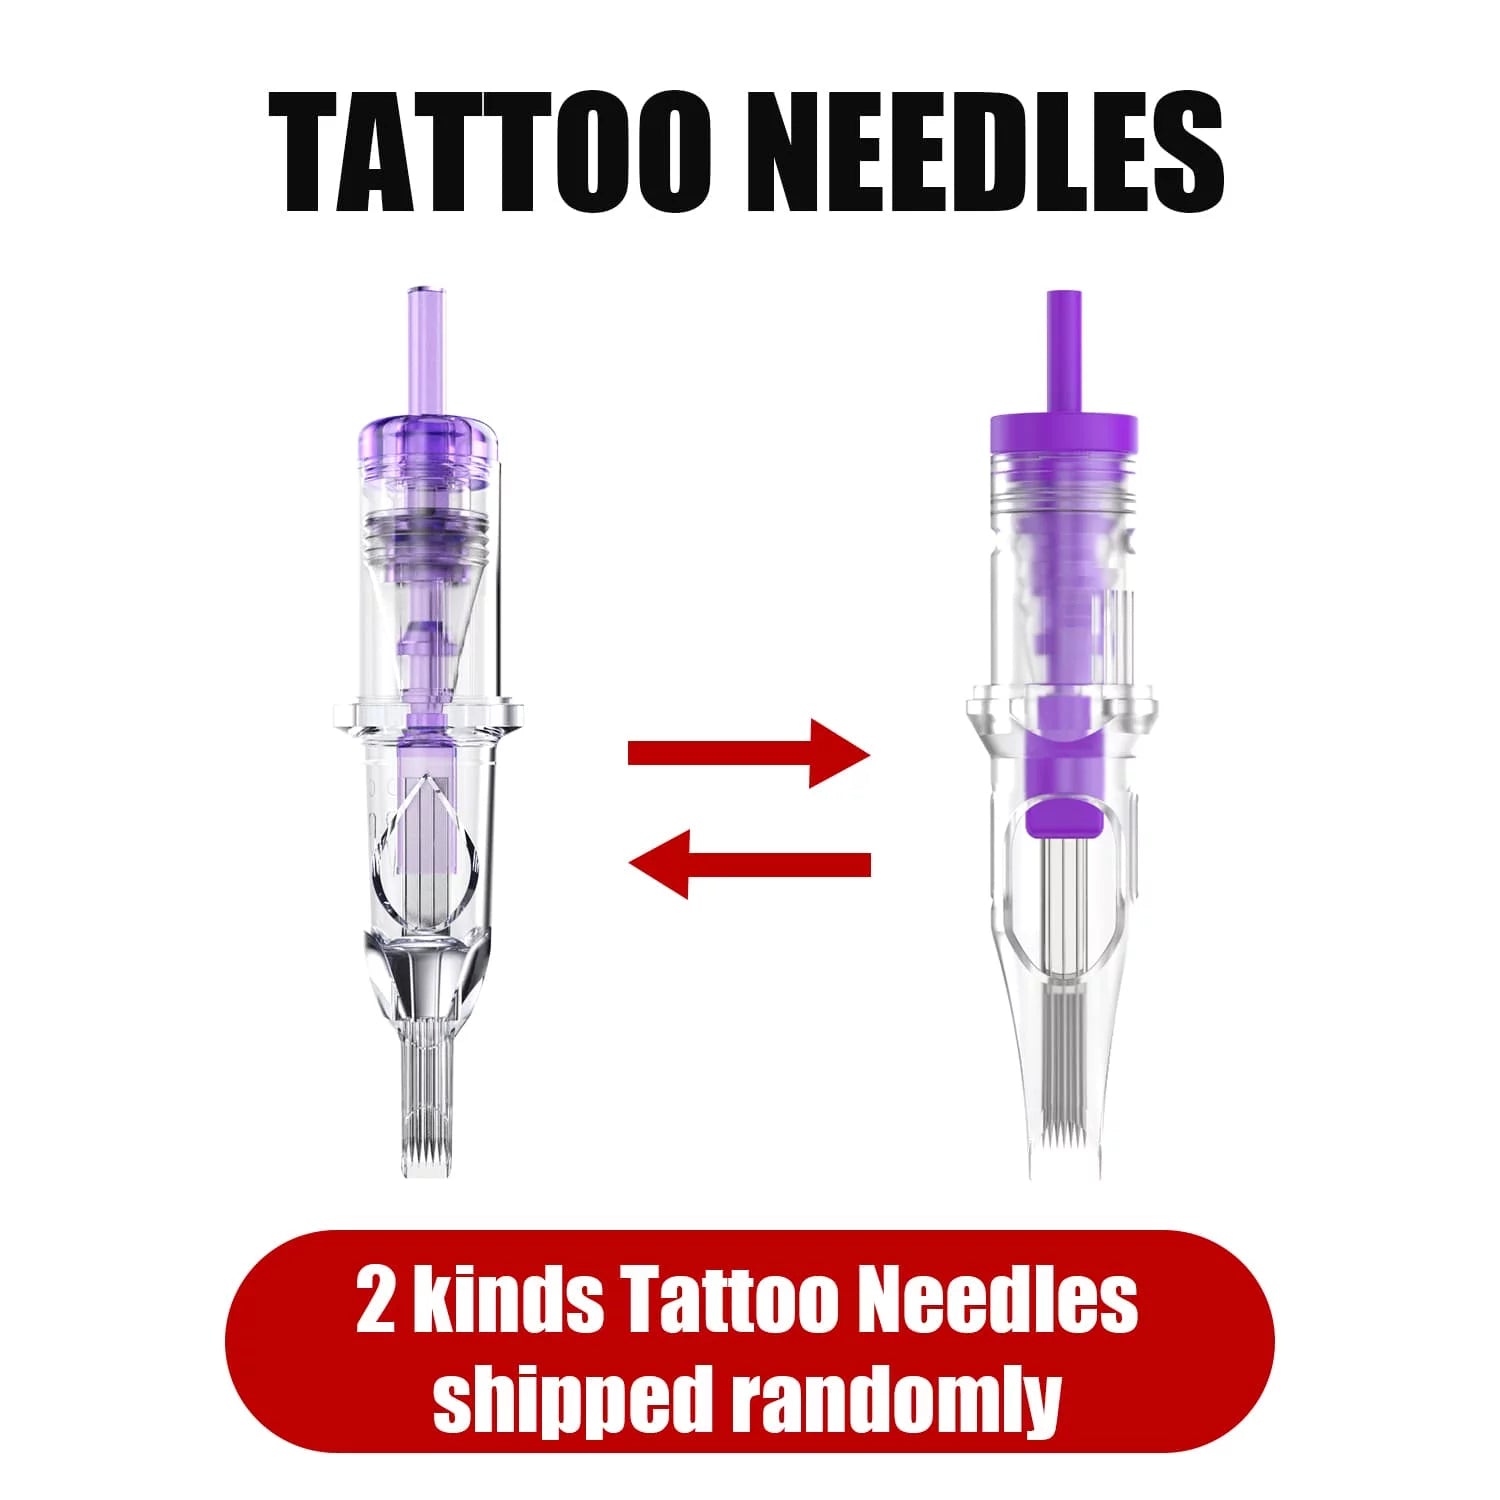 Tattoo Needles 101 - Everything you need to know; explained | Toochi Tattoo